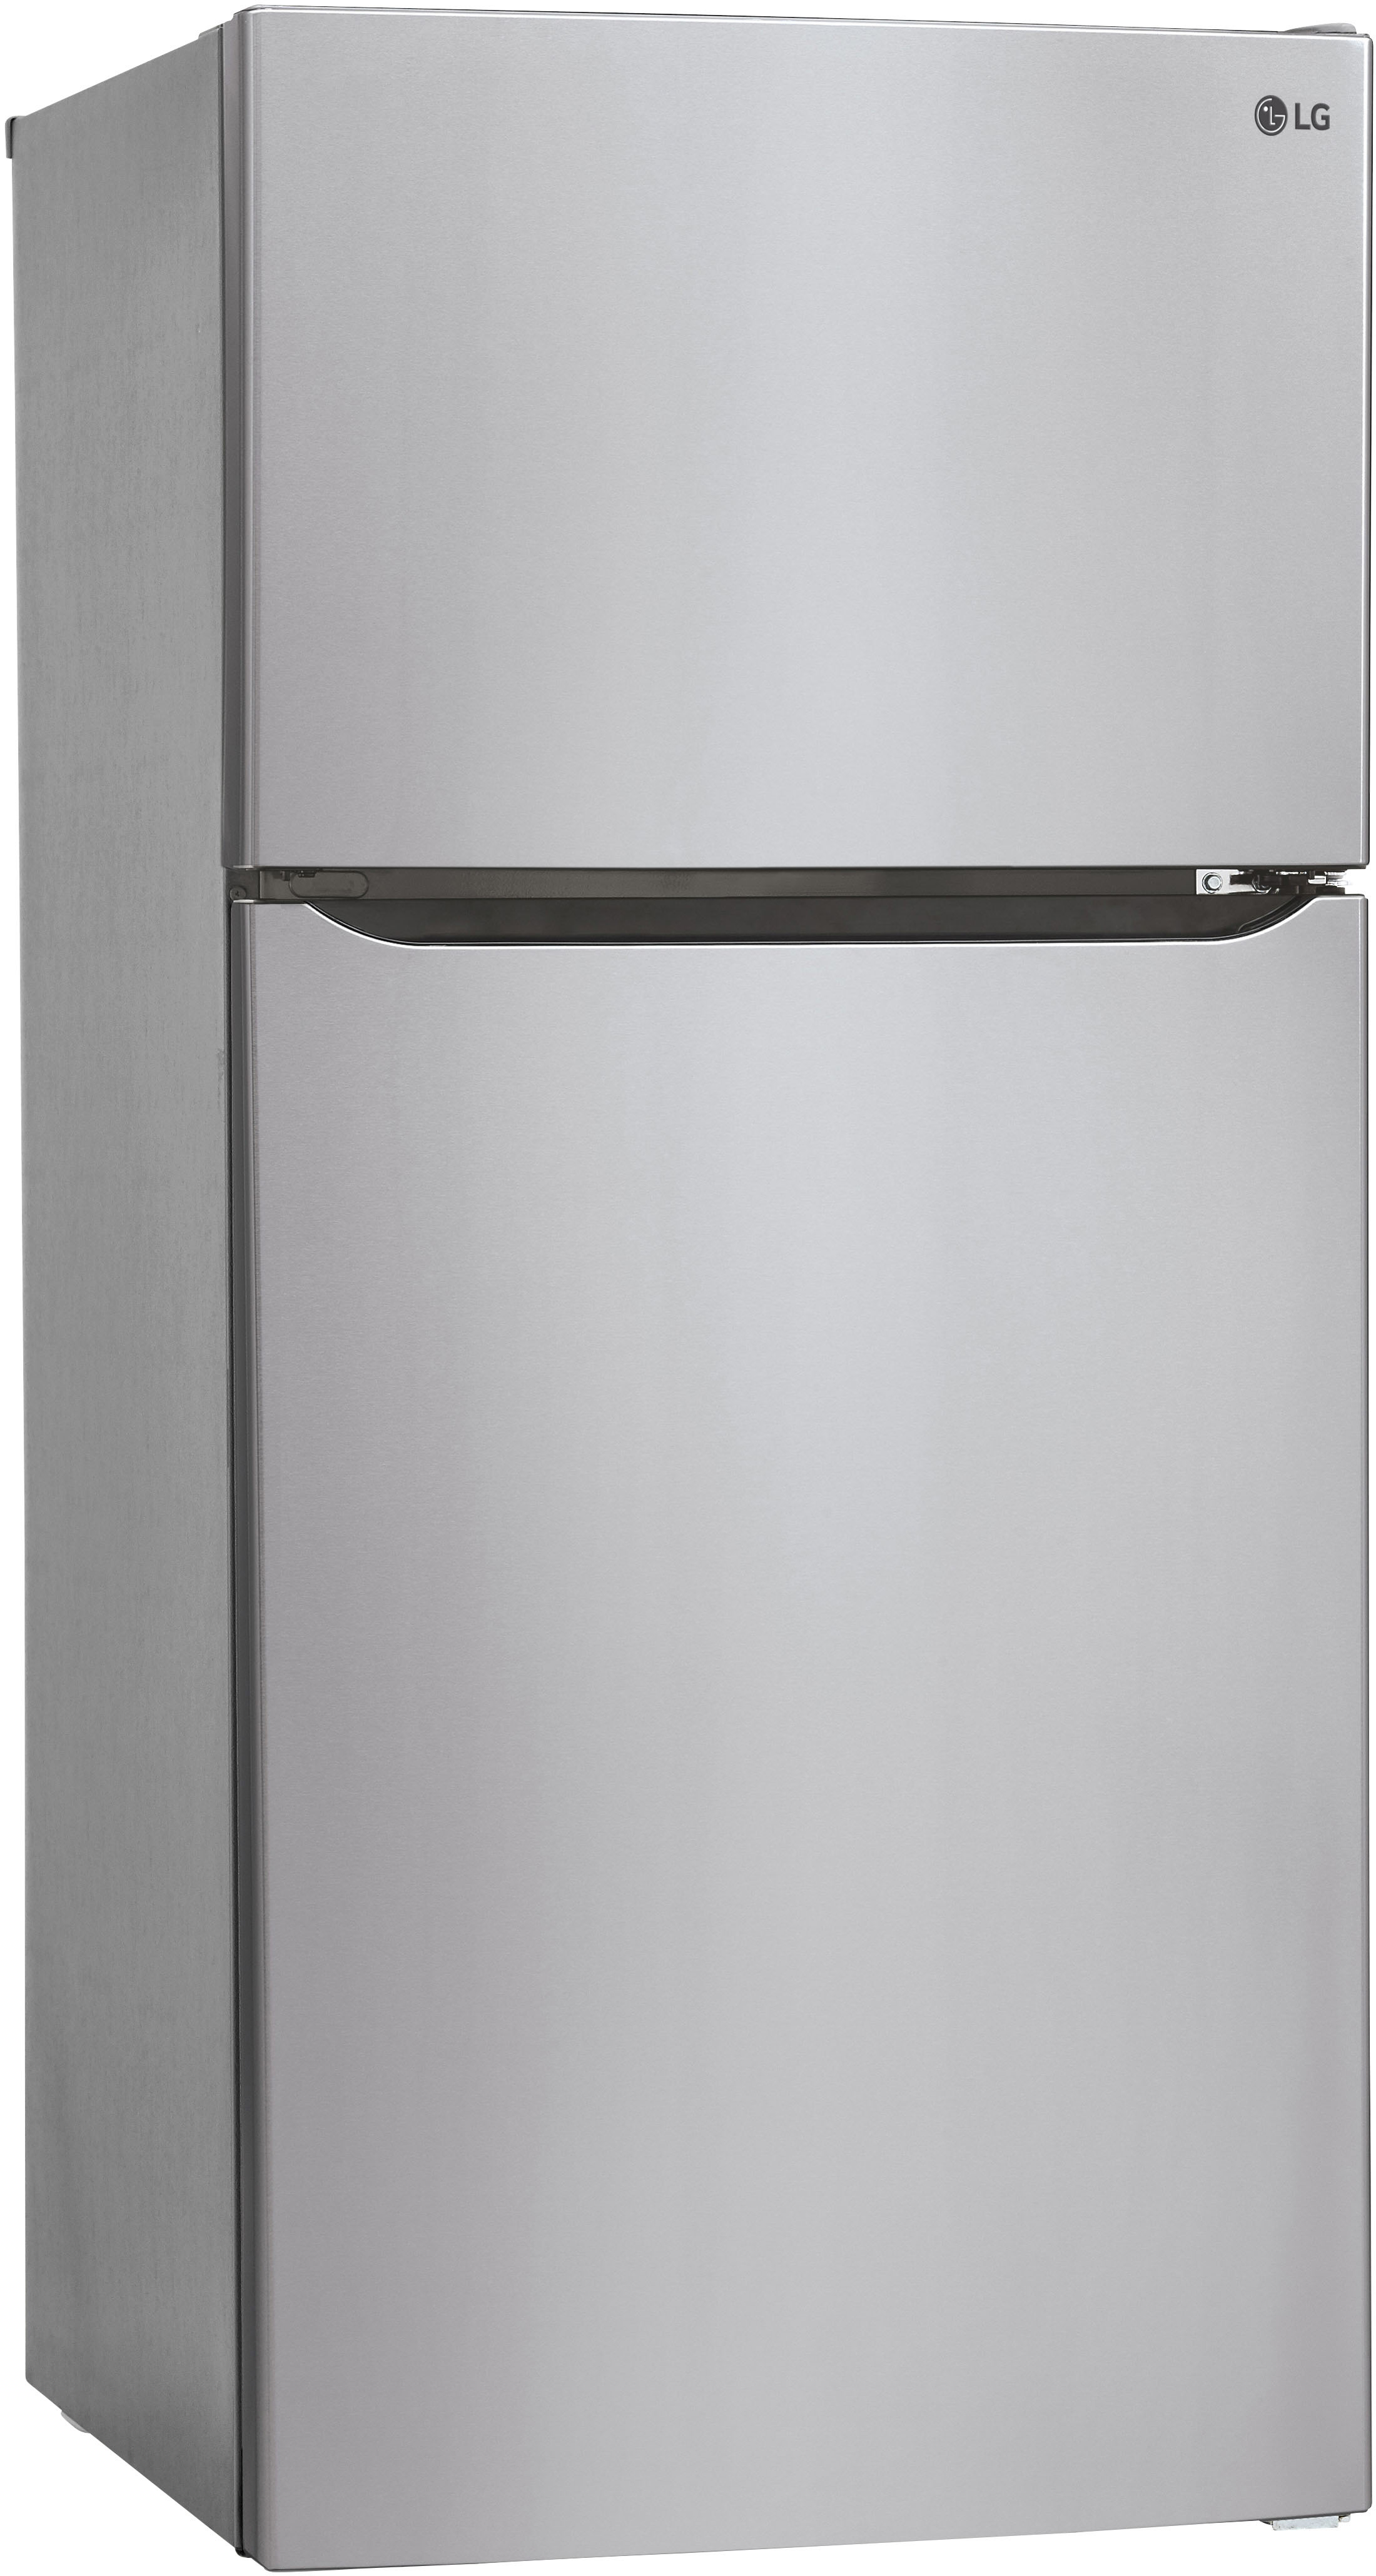 Left View: Samsung - 15.6 cu. ft. Top Freezer Refrigerator with All-Around Cooling - Stainless steel